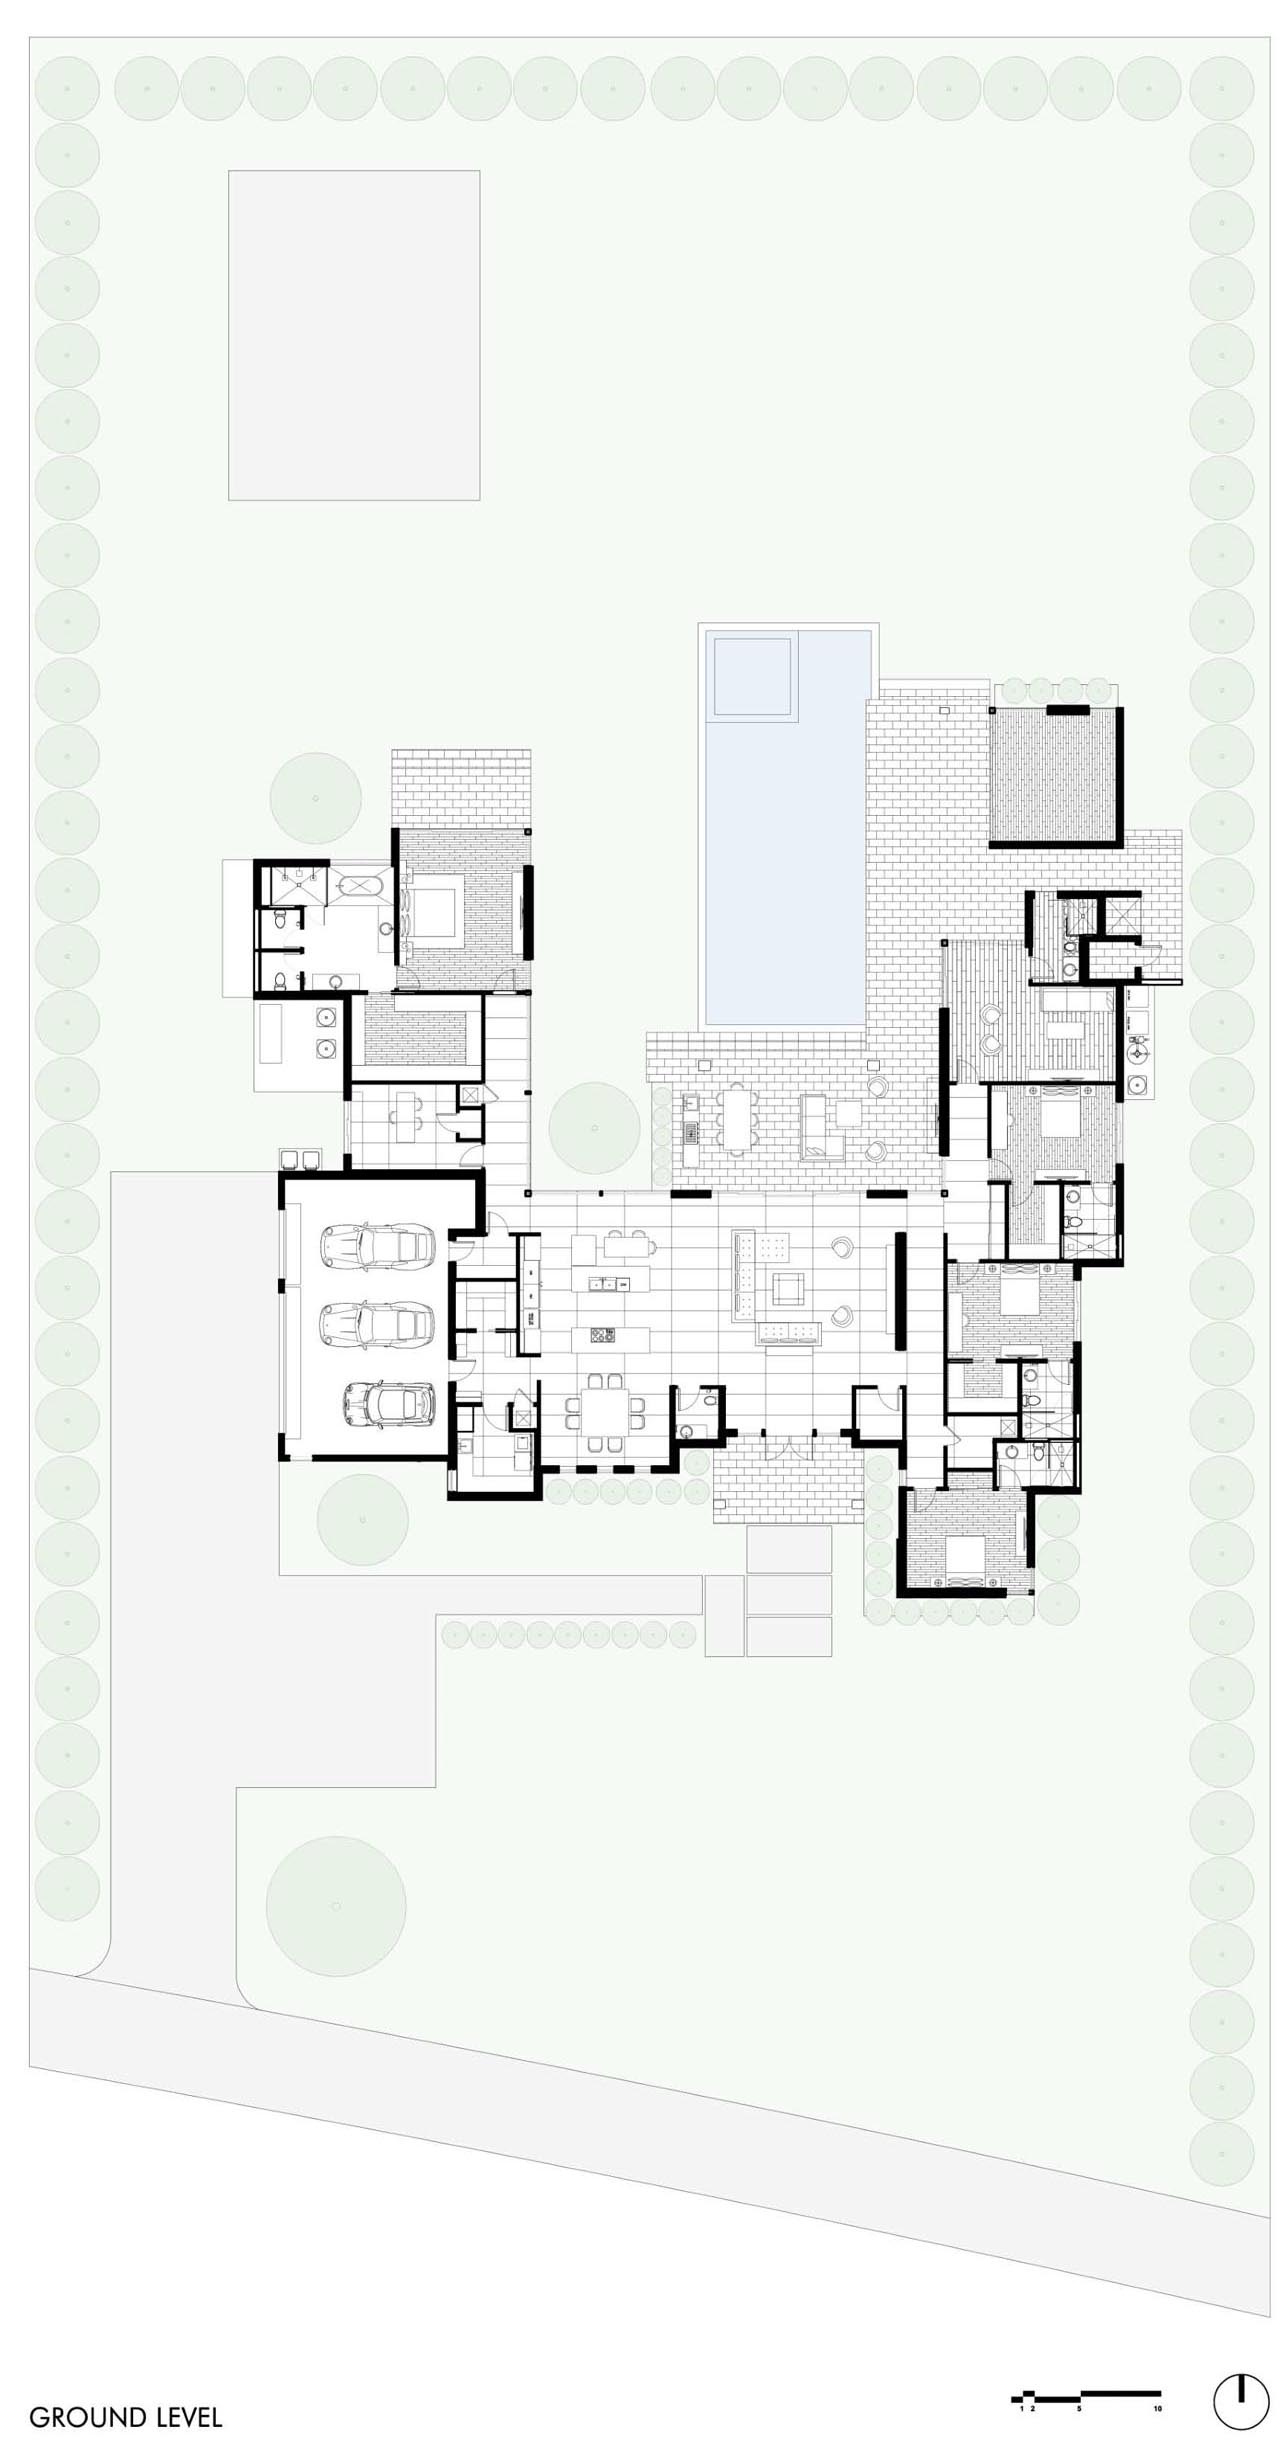 The floor plan of a U-shaped house with a swimming pool.